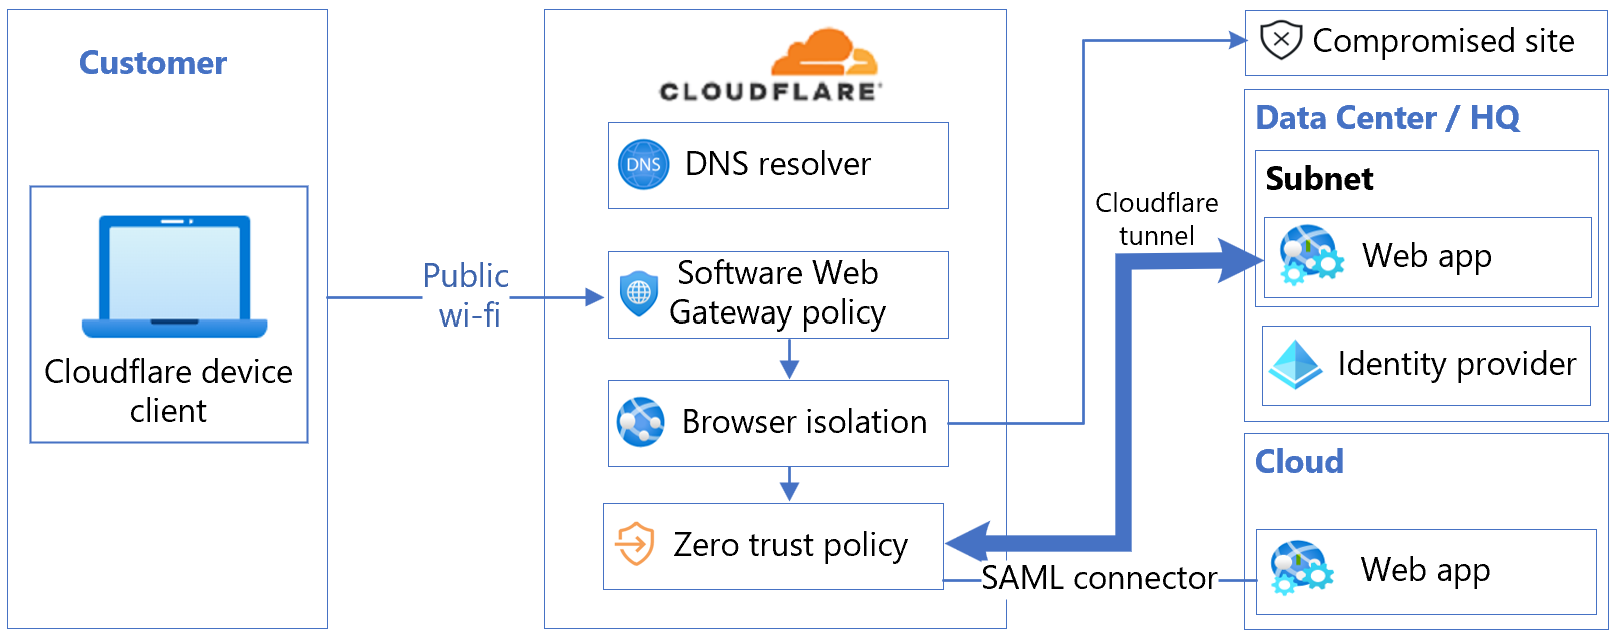 Screenshot shows the architecture diagram of Cloudflare and Azure AD integration